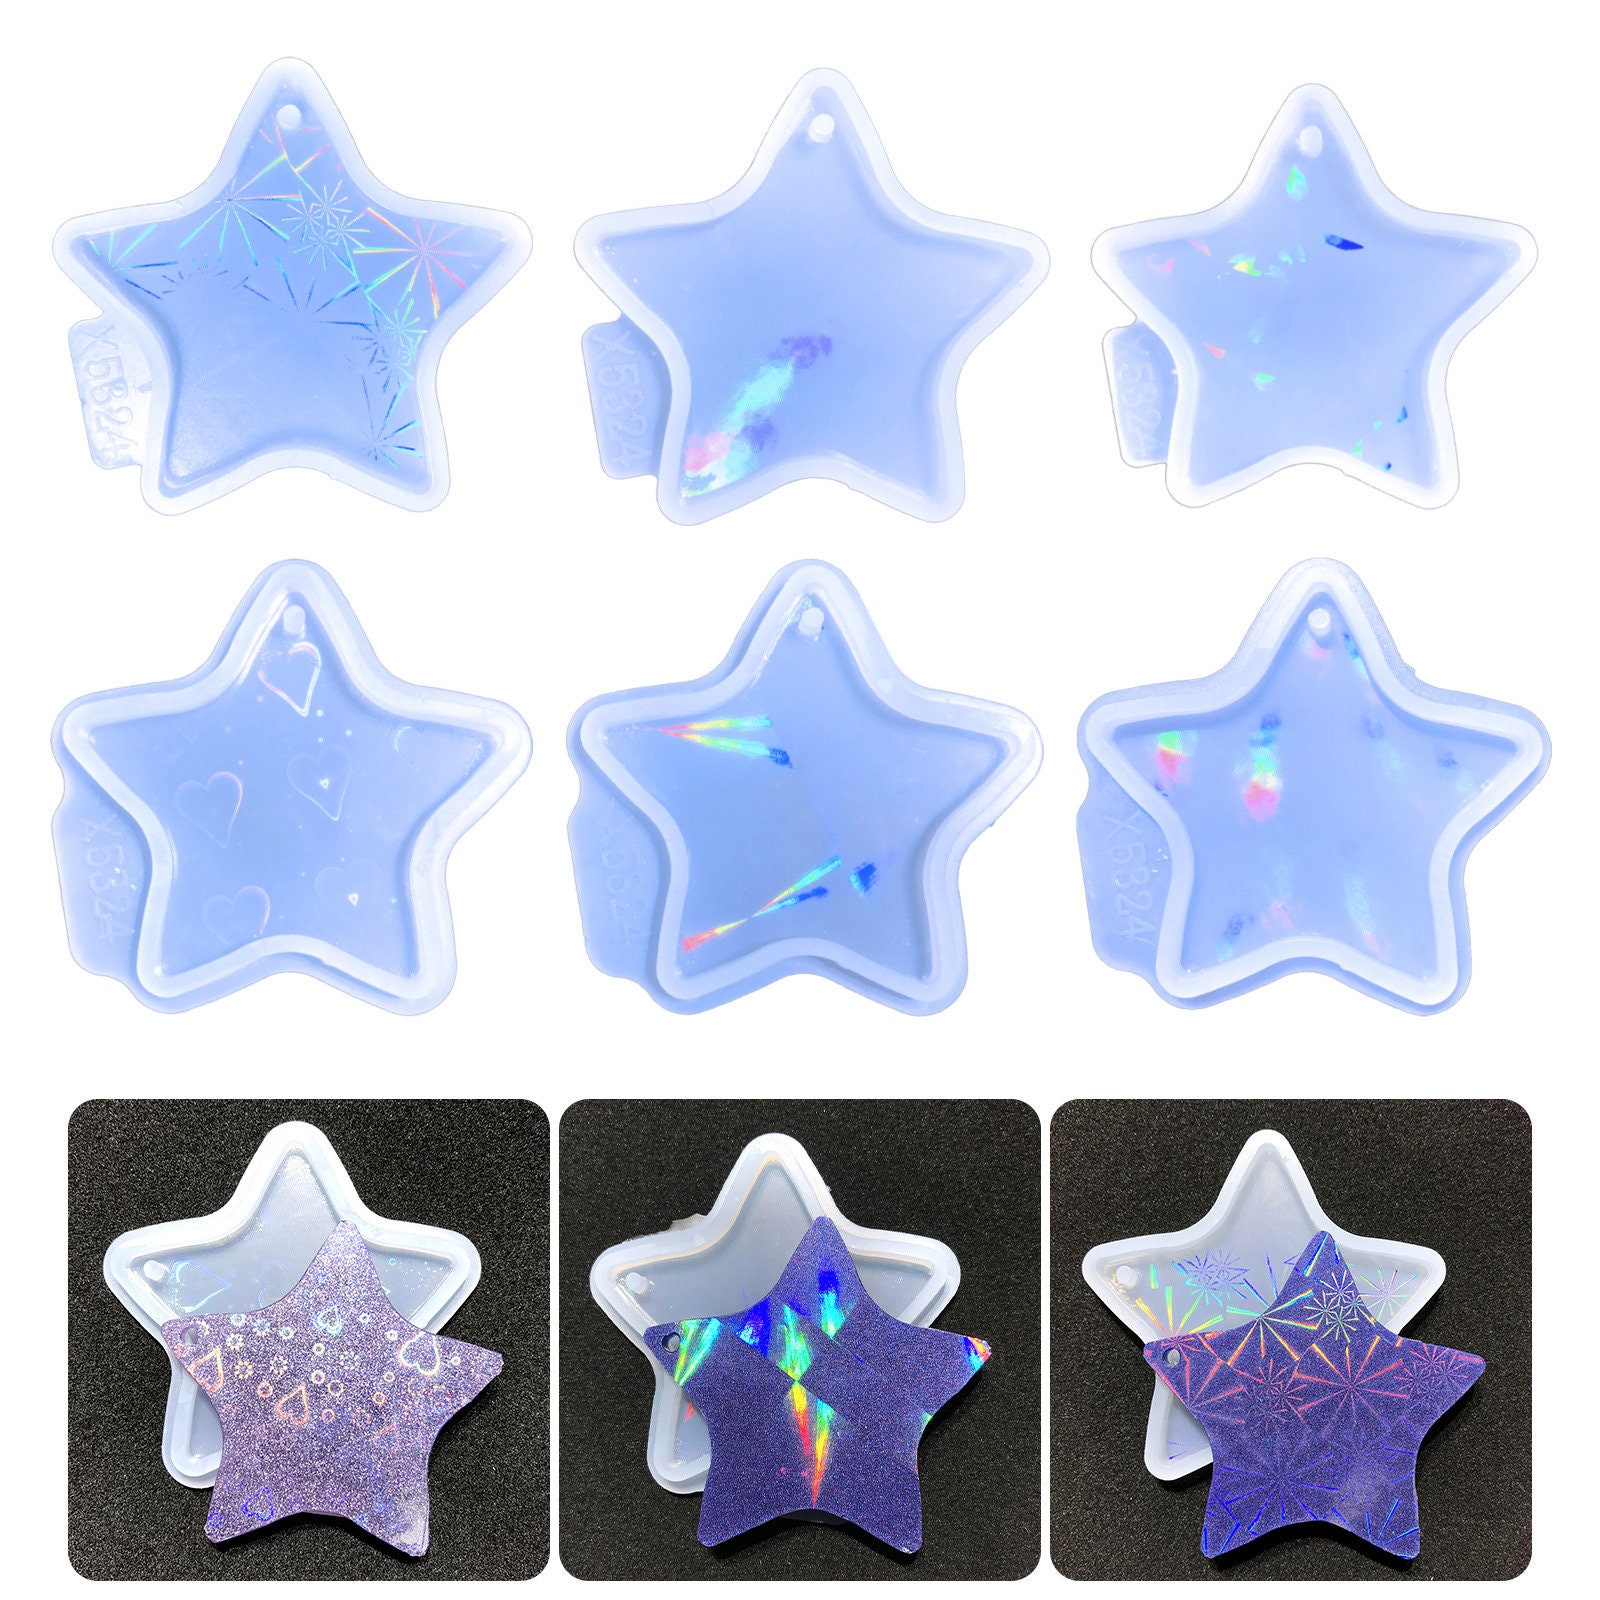 Holographic Christmas Resin Molds Silicone Snowflake Resin Molds with 6  Varying Shape,Christmas Ornament Molds for Resin Casting,Snowflake Epoxy  Resin